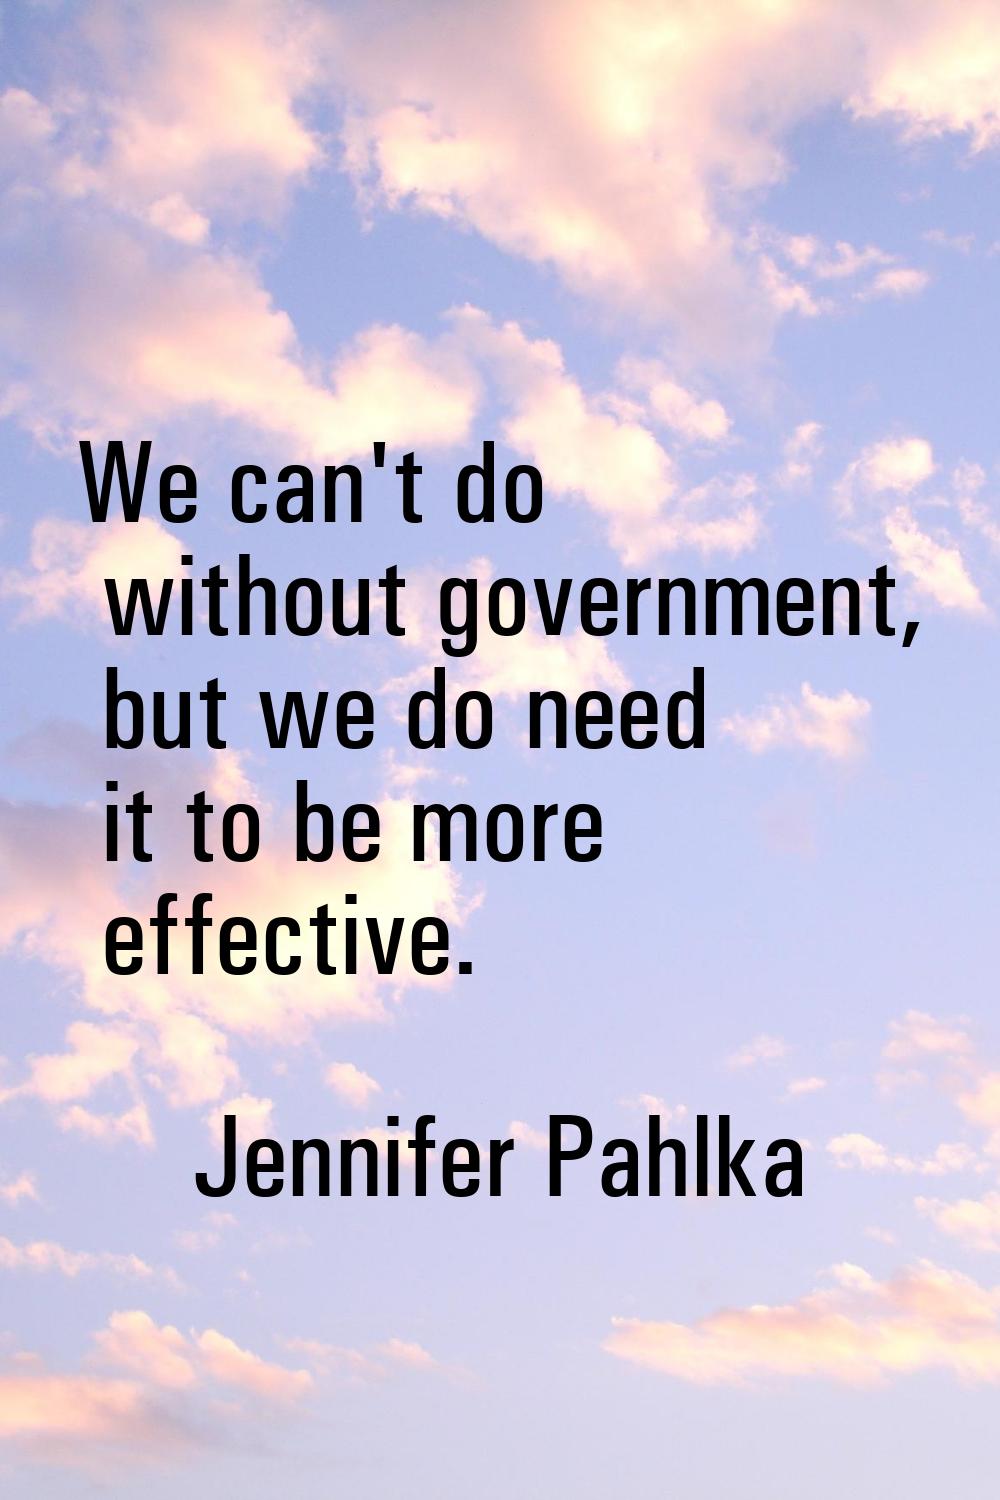 We can't do without government, but we do need it to be more effective.